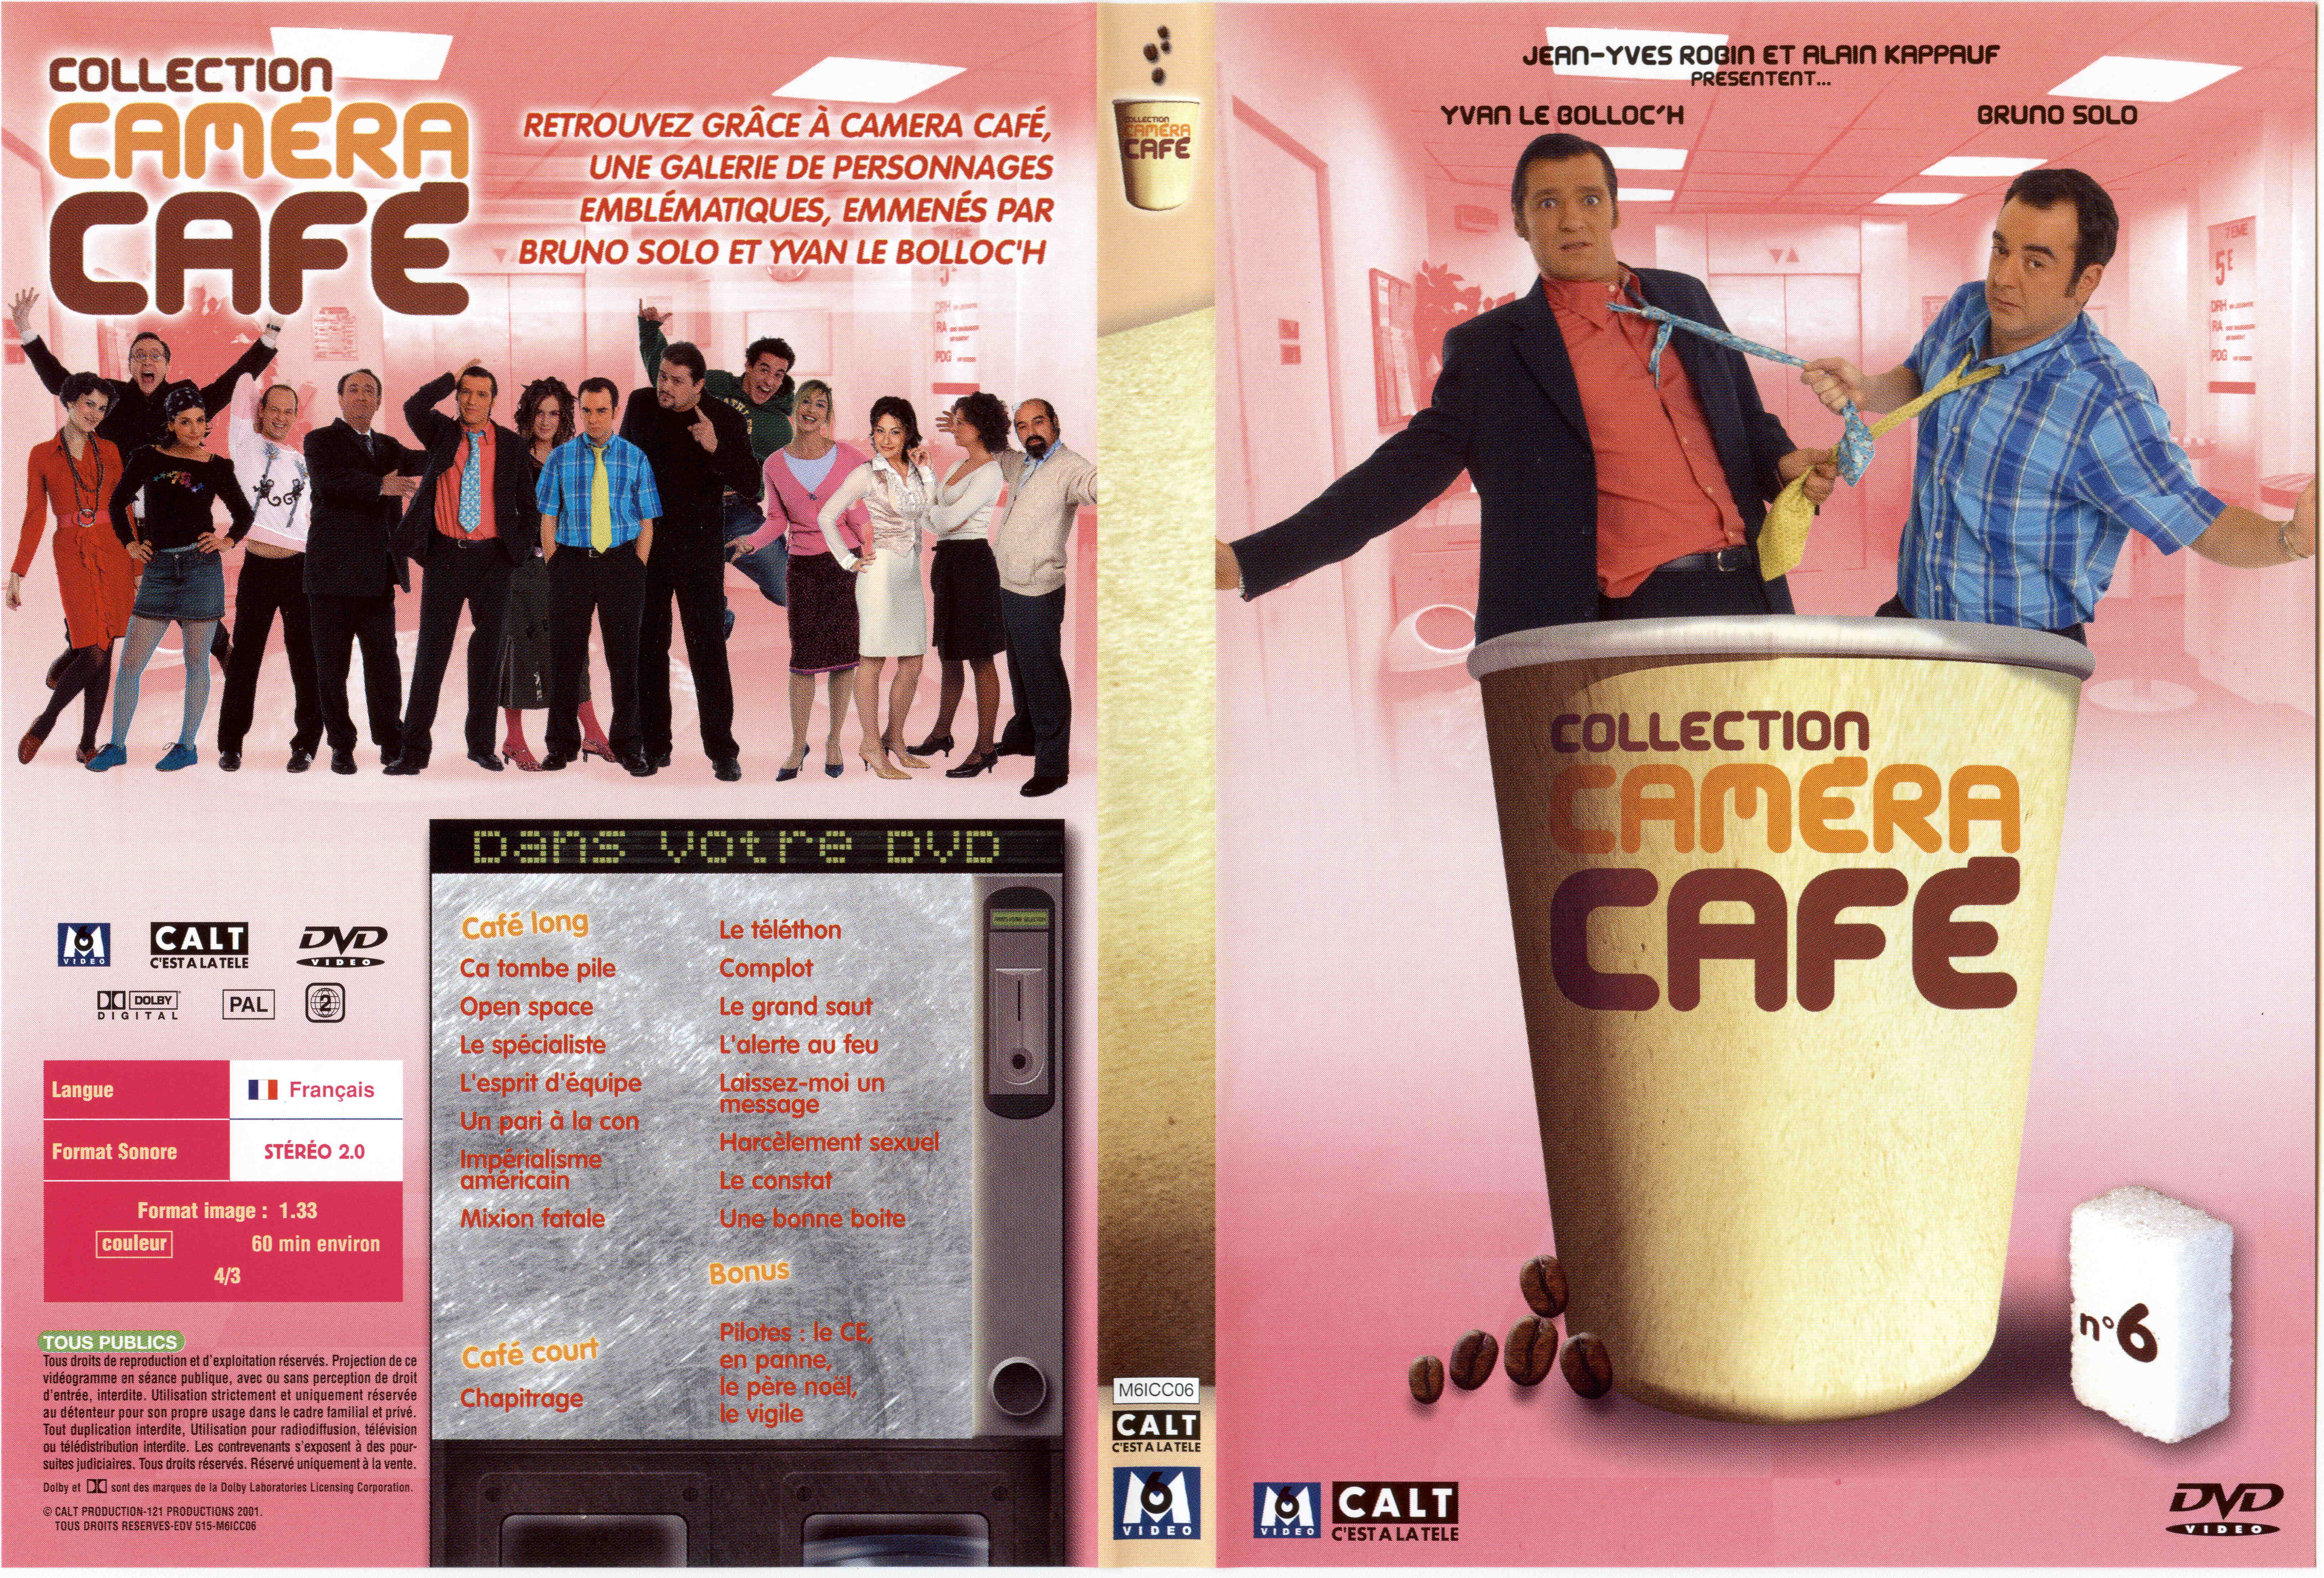 Jaquette DVD Collection Camera Cafe vol 06